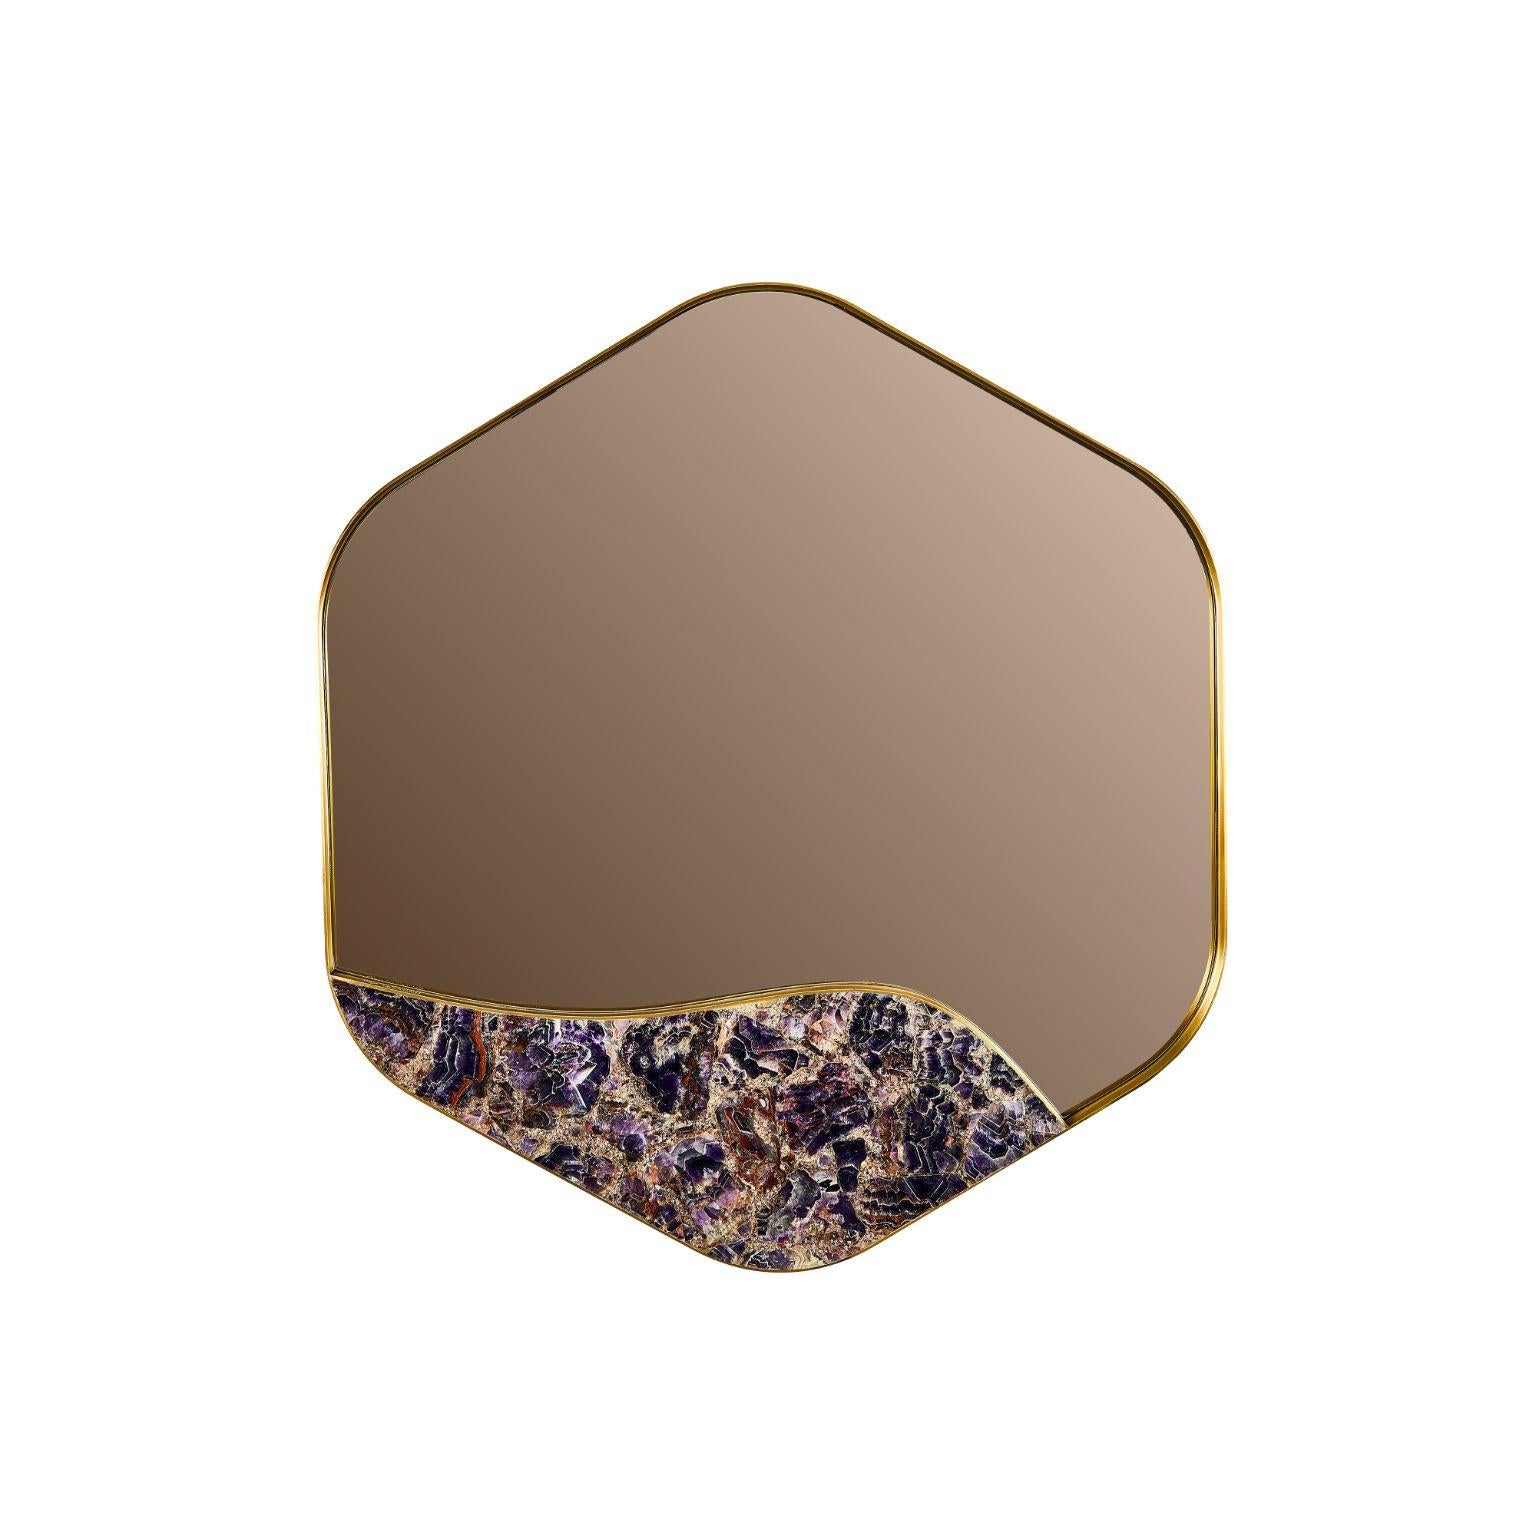 Aras mirror amethyst by Marble Balloon 
Dimensions: L 5cm x W 83.5cm x H 76.5cm
Materials: Brass, semi-precious amethyst stone.

100% Brass material is used in the frame and semi-precious amethyst stone is used in the lower part.

Marble